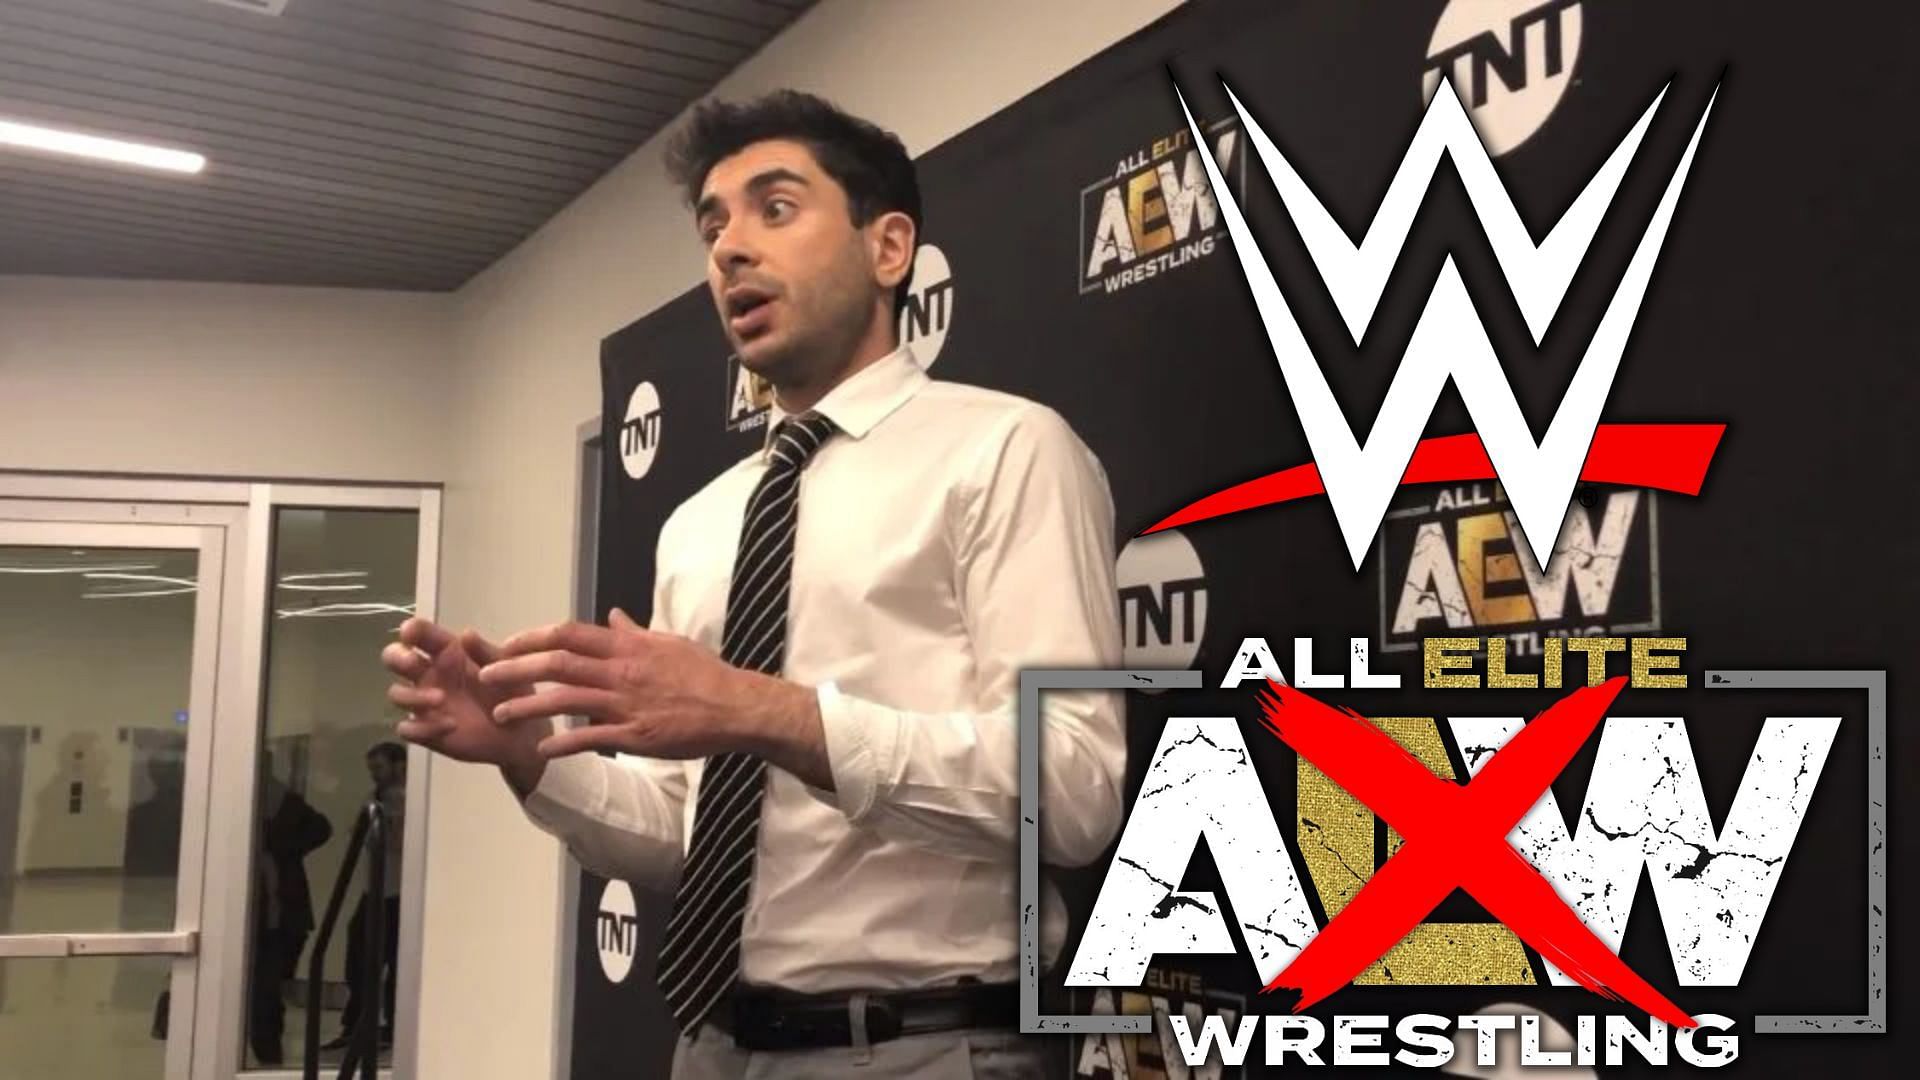 Is Tony Khan the perfect wrestling booker, or have the claims been exaggerated?